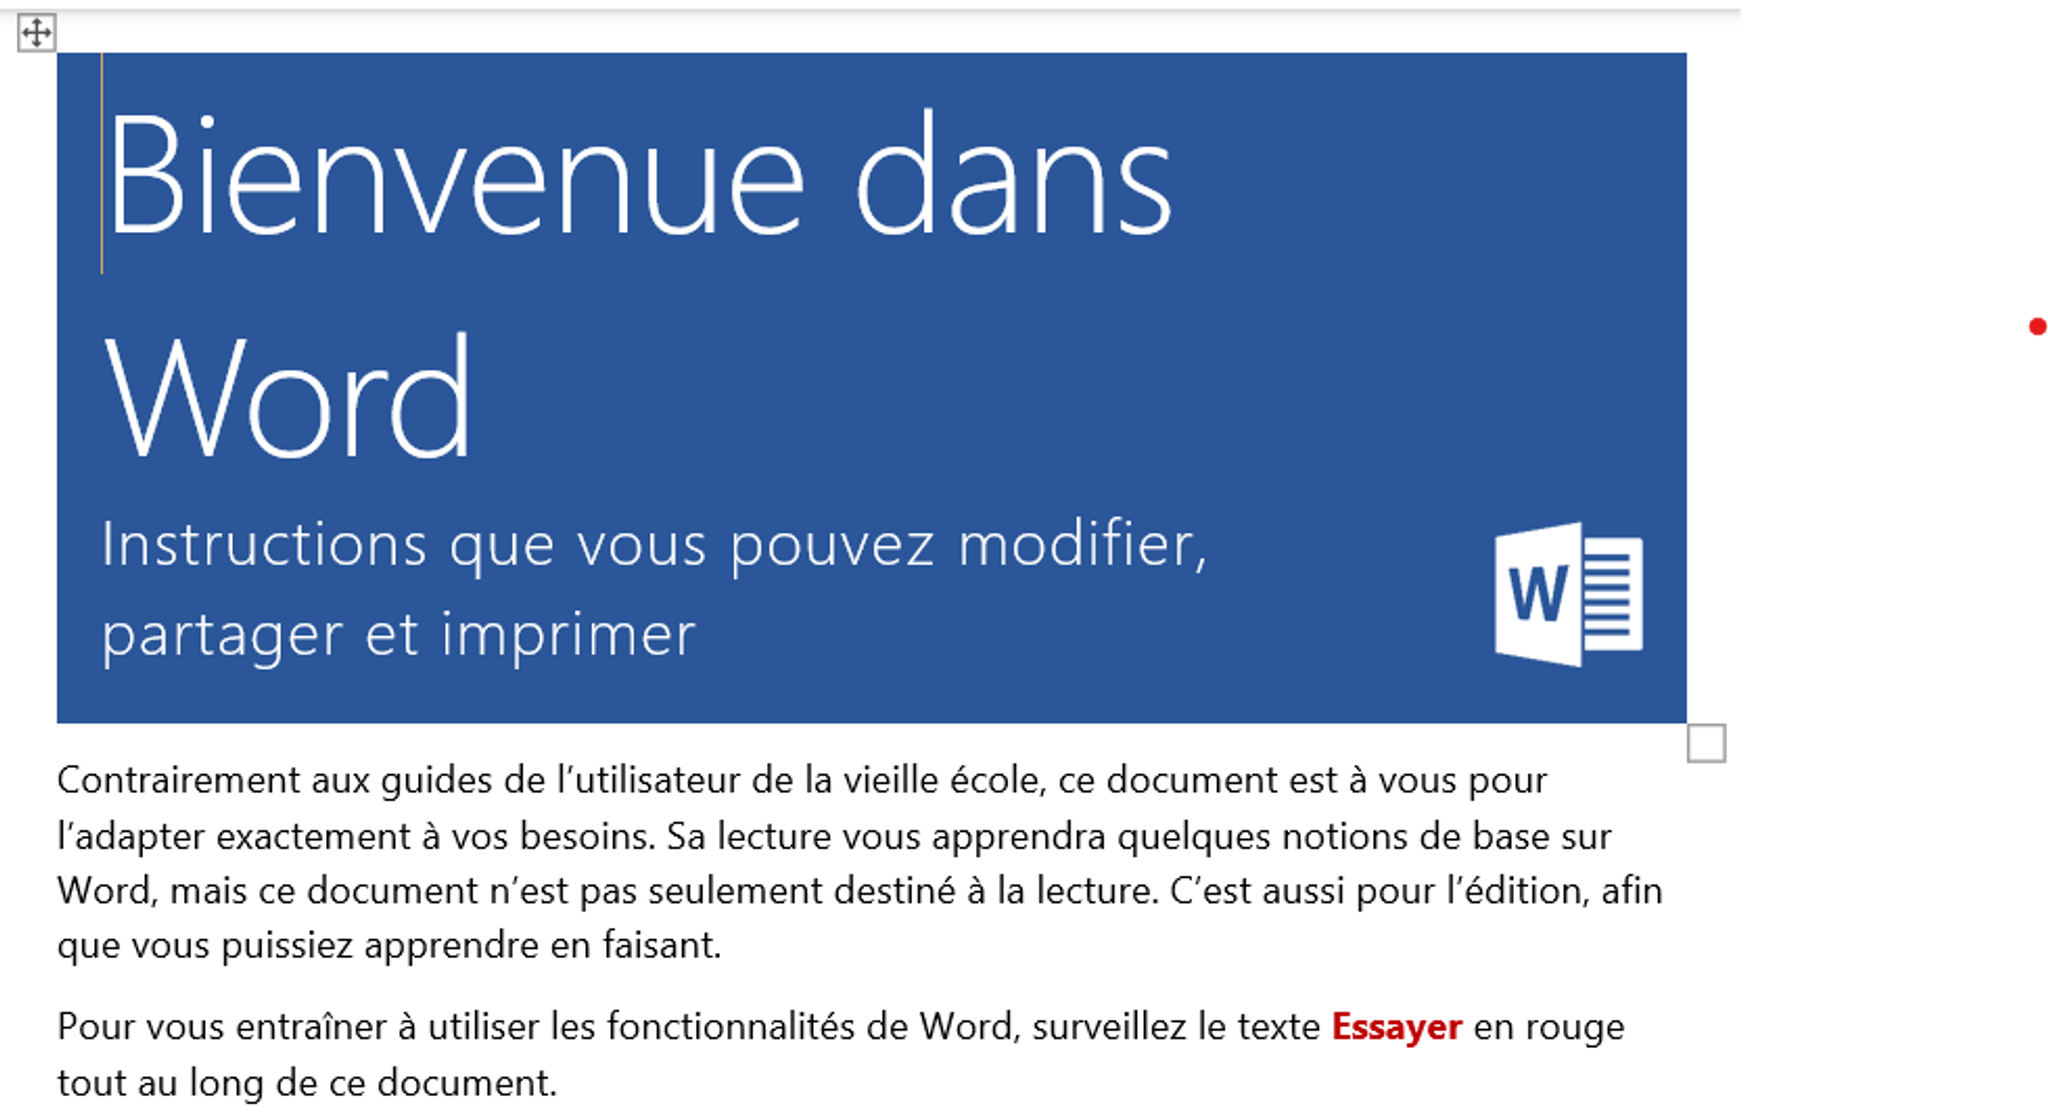 French translation results of an MS Word document